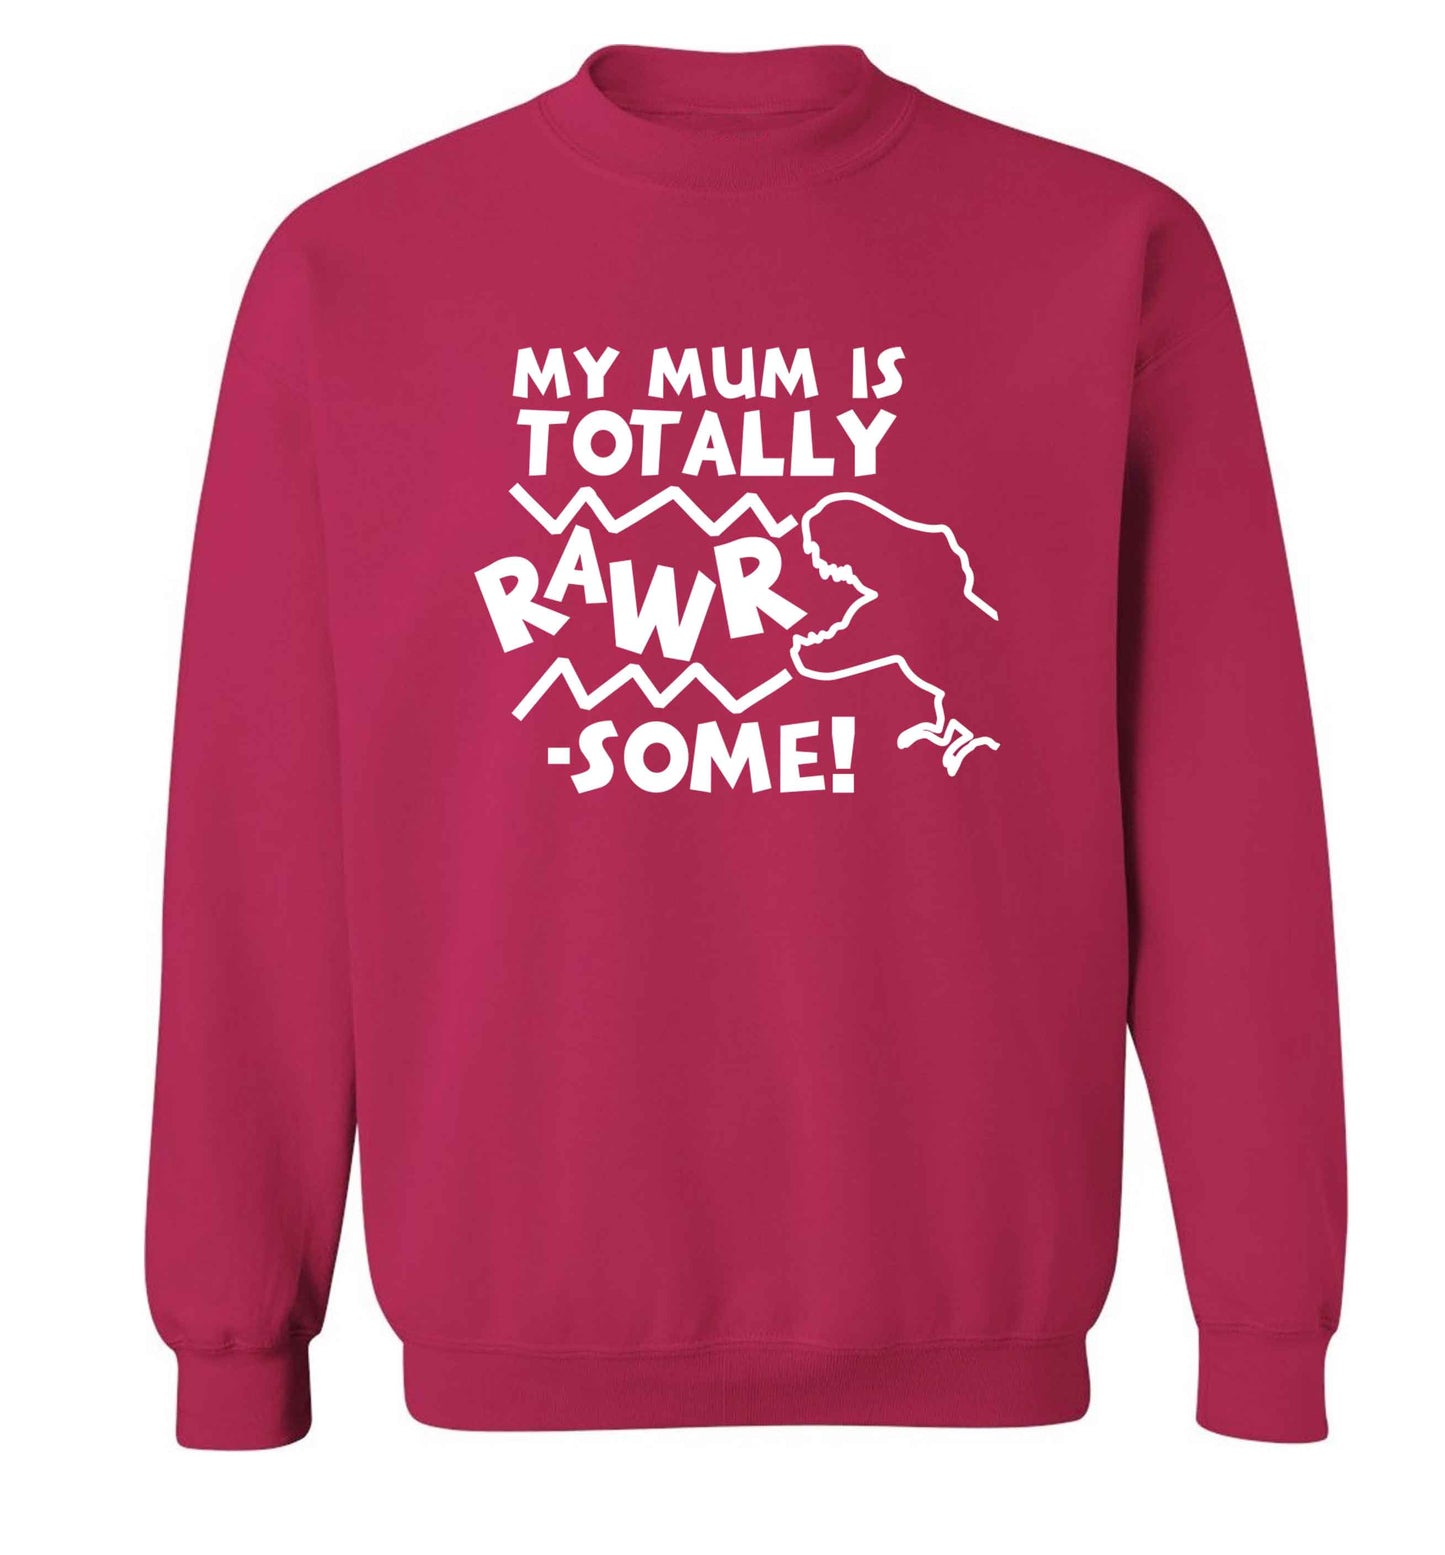 My mum is totally rawrsome adult's unisex pink sweater 2XL